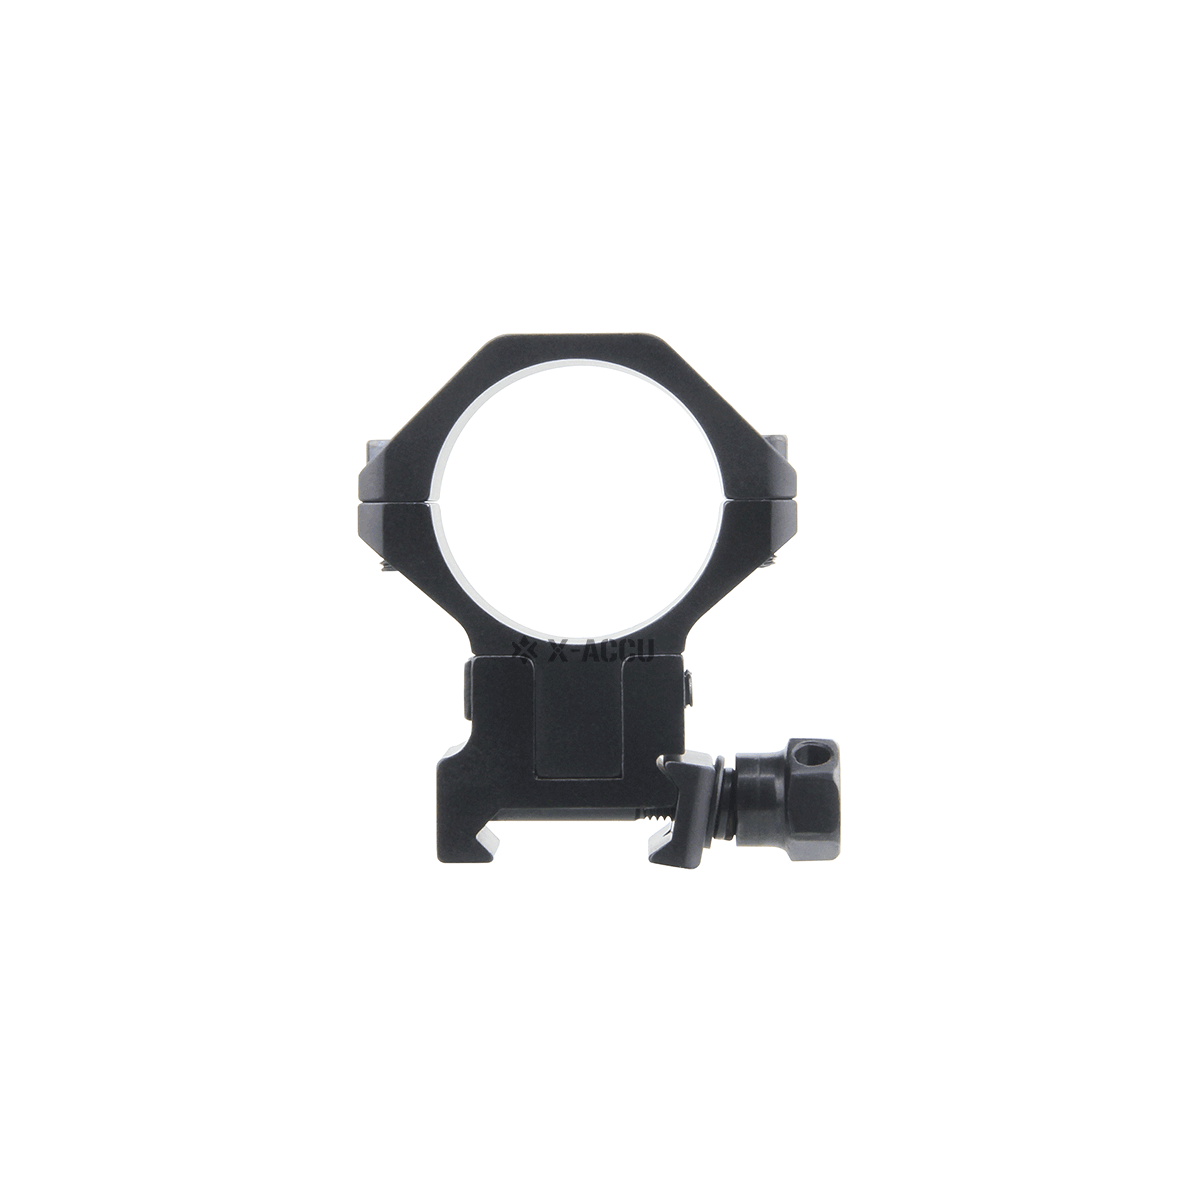 GIF of Black adjustable scope mount with its different sets